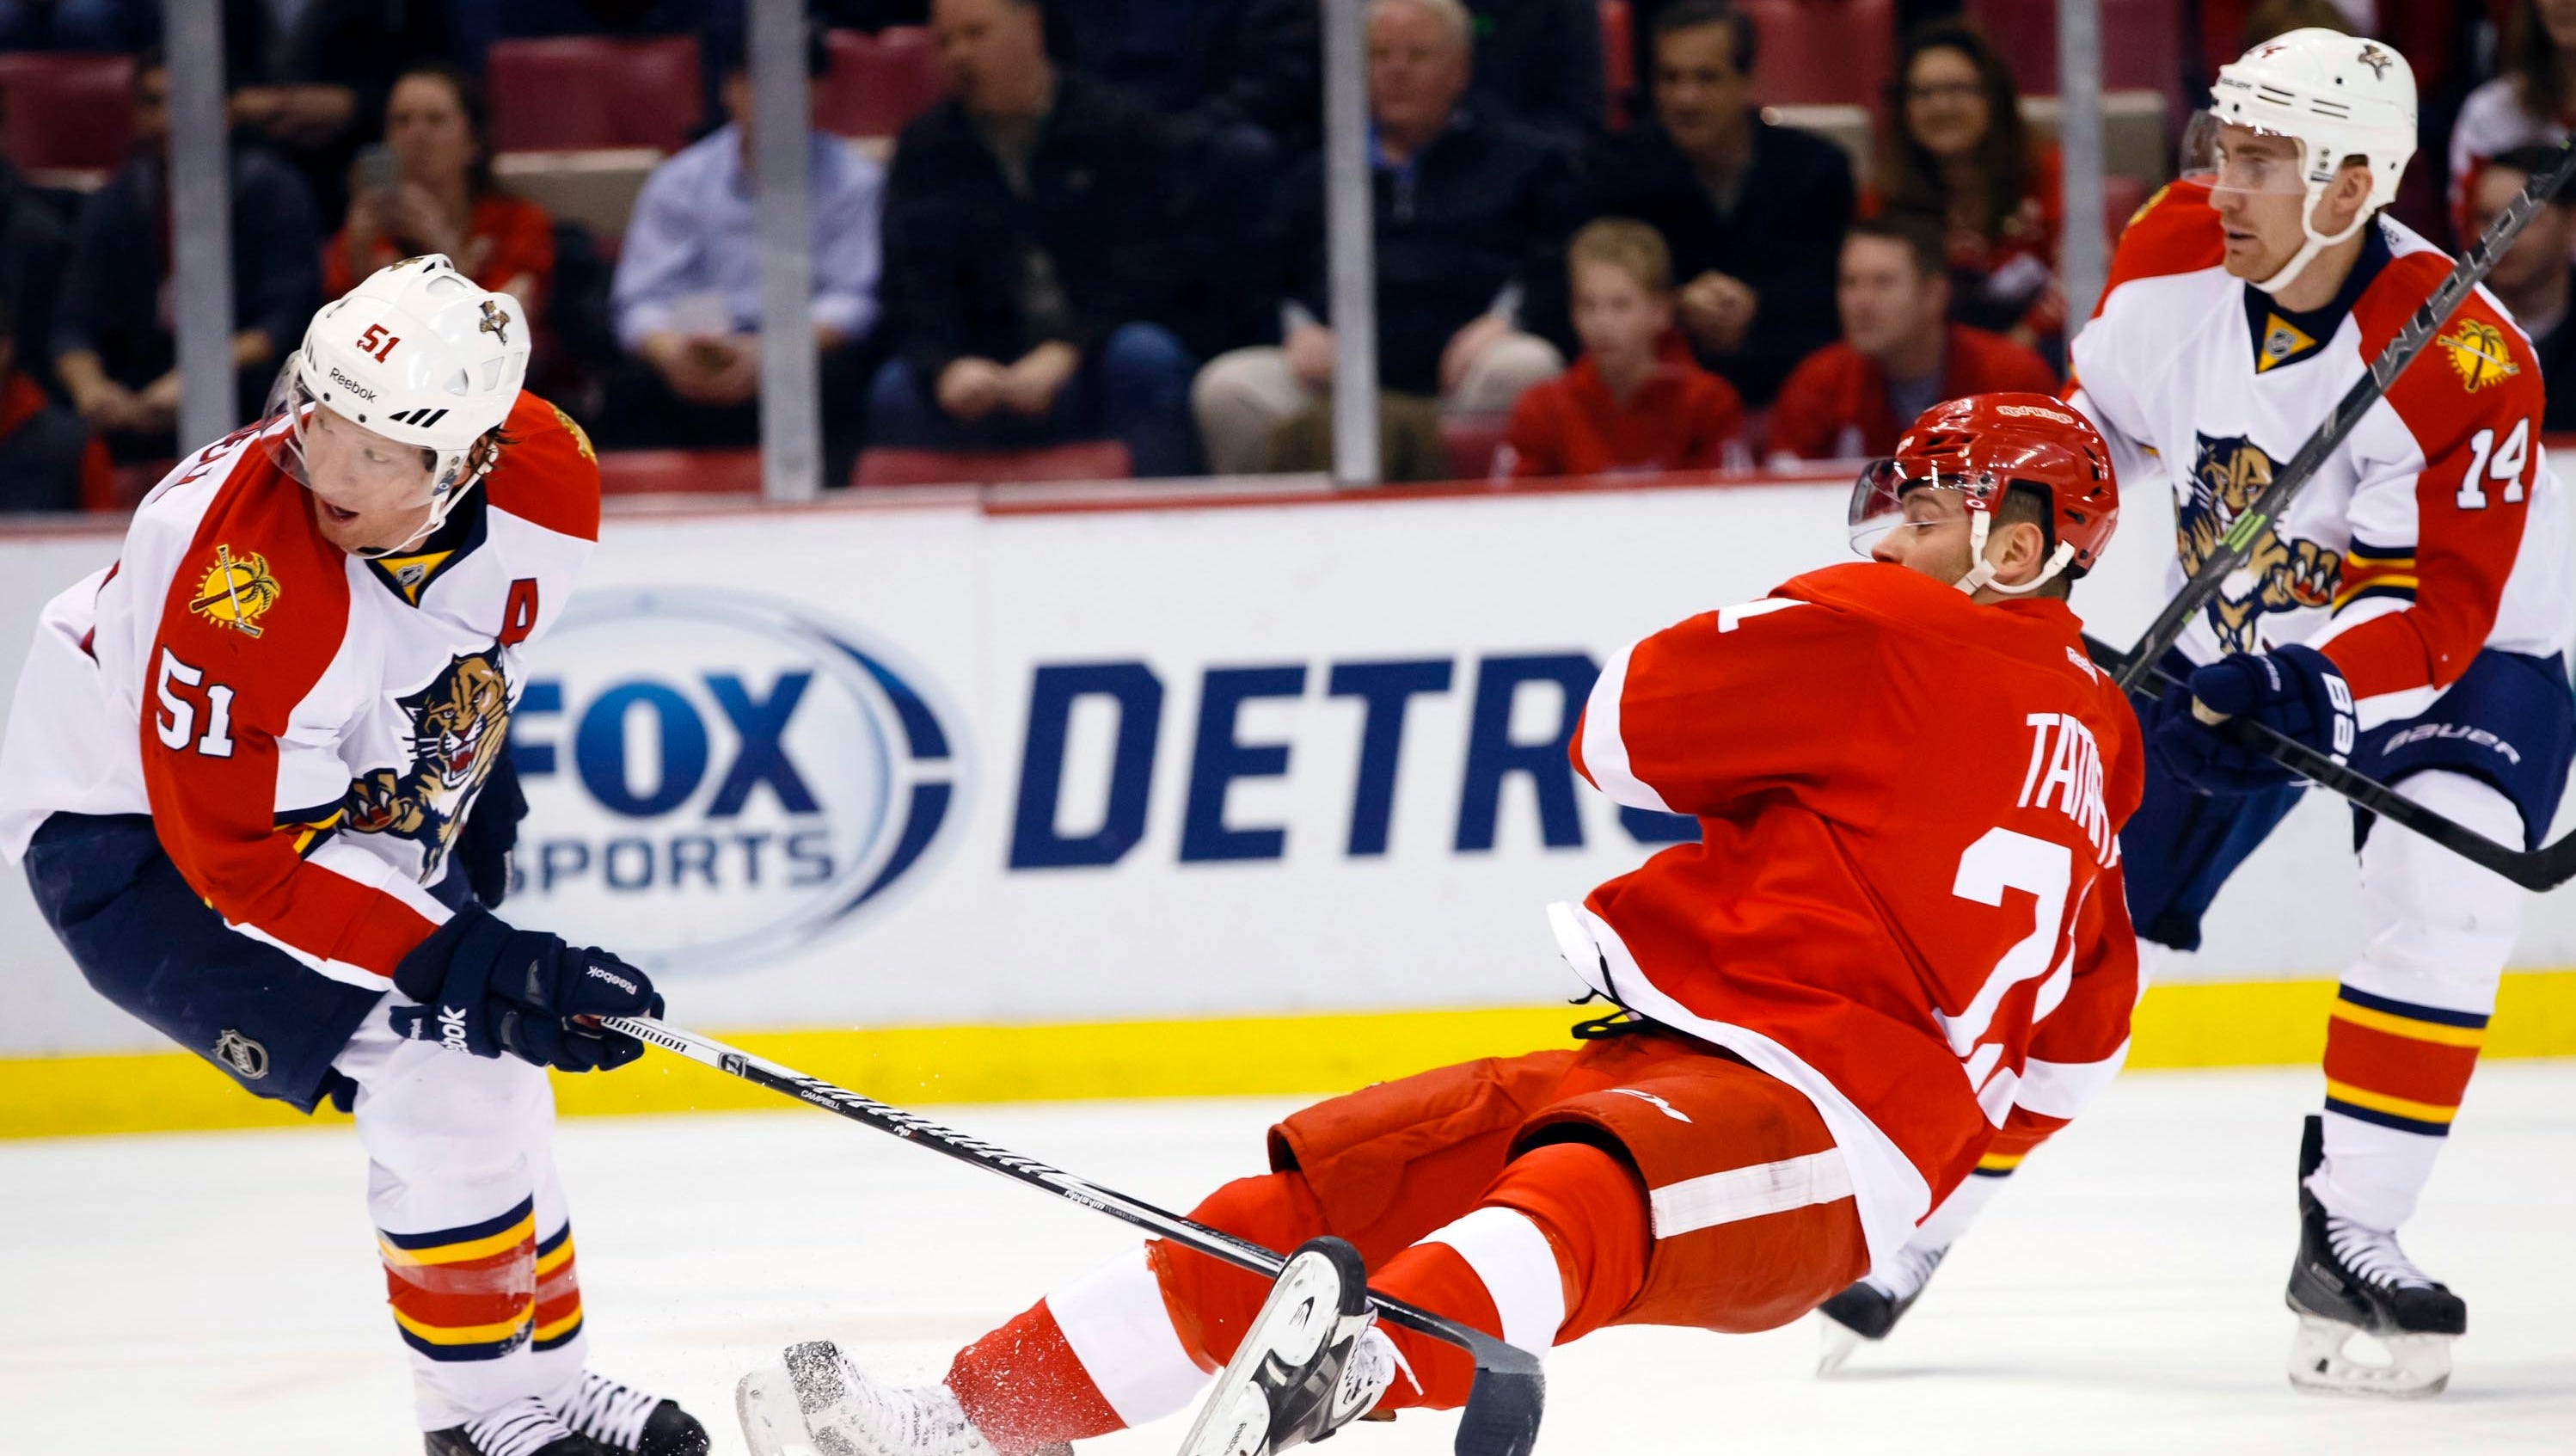 Red Wings left wing Tomas Tatar shoots while being defended by Panthers defenseman Brian Campbell in the first period.